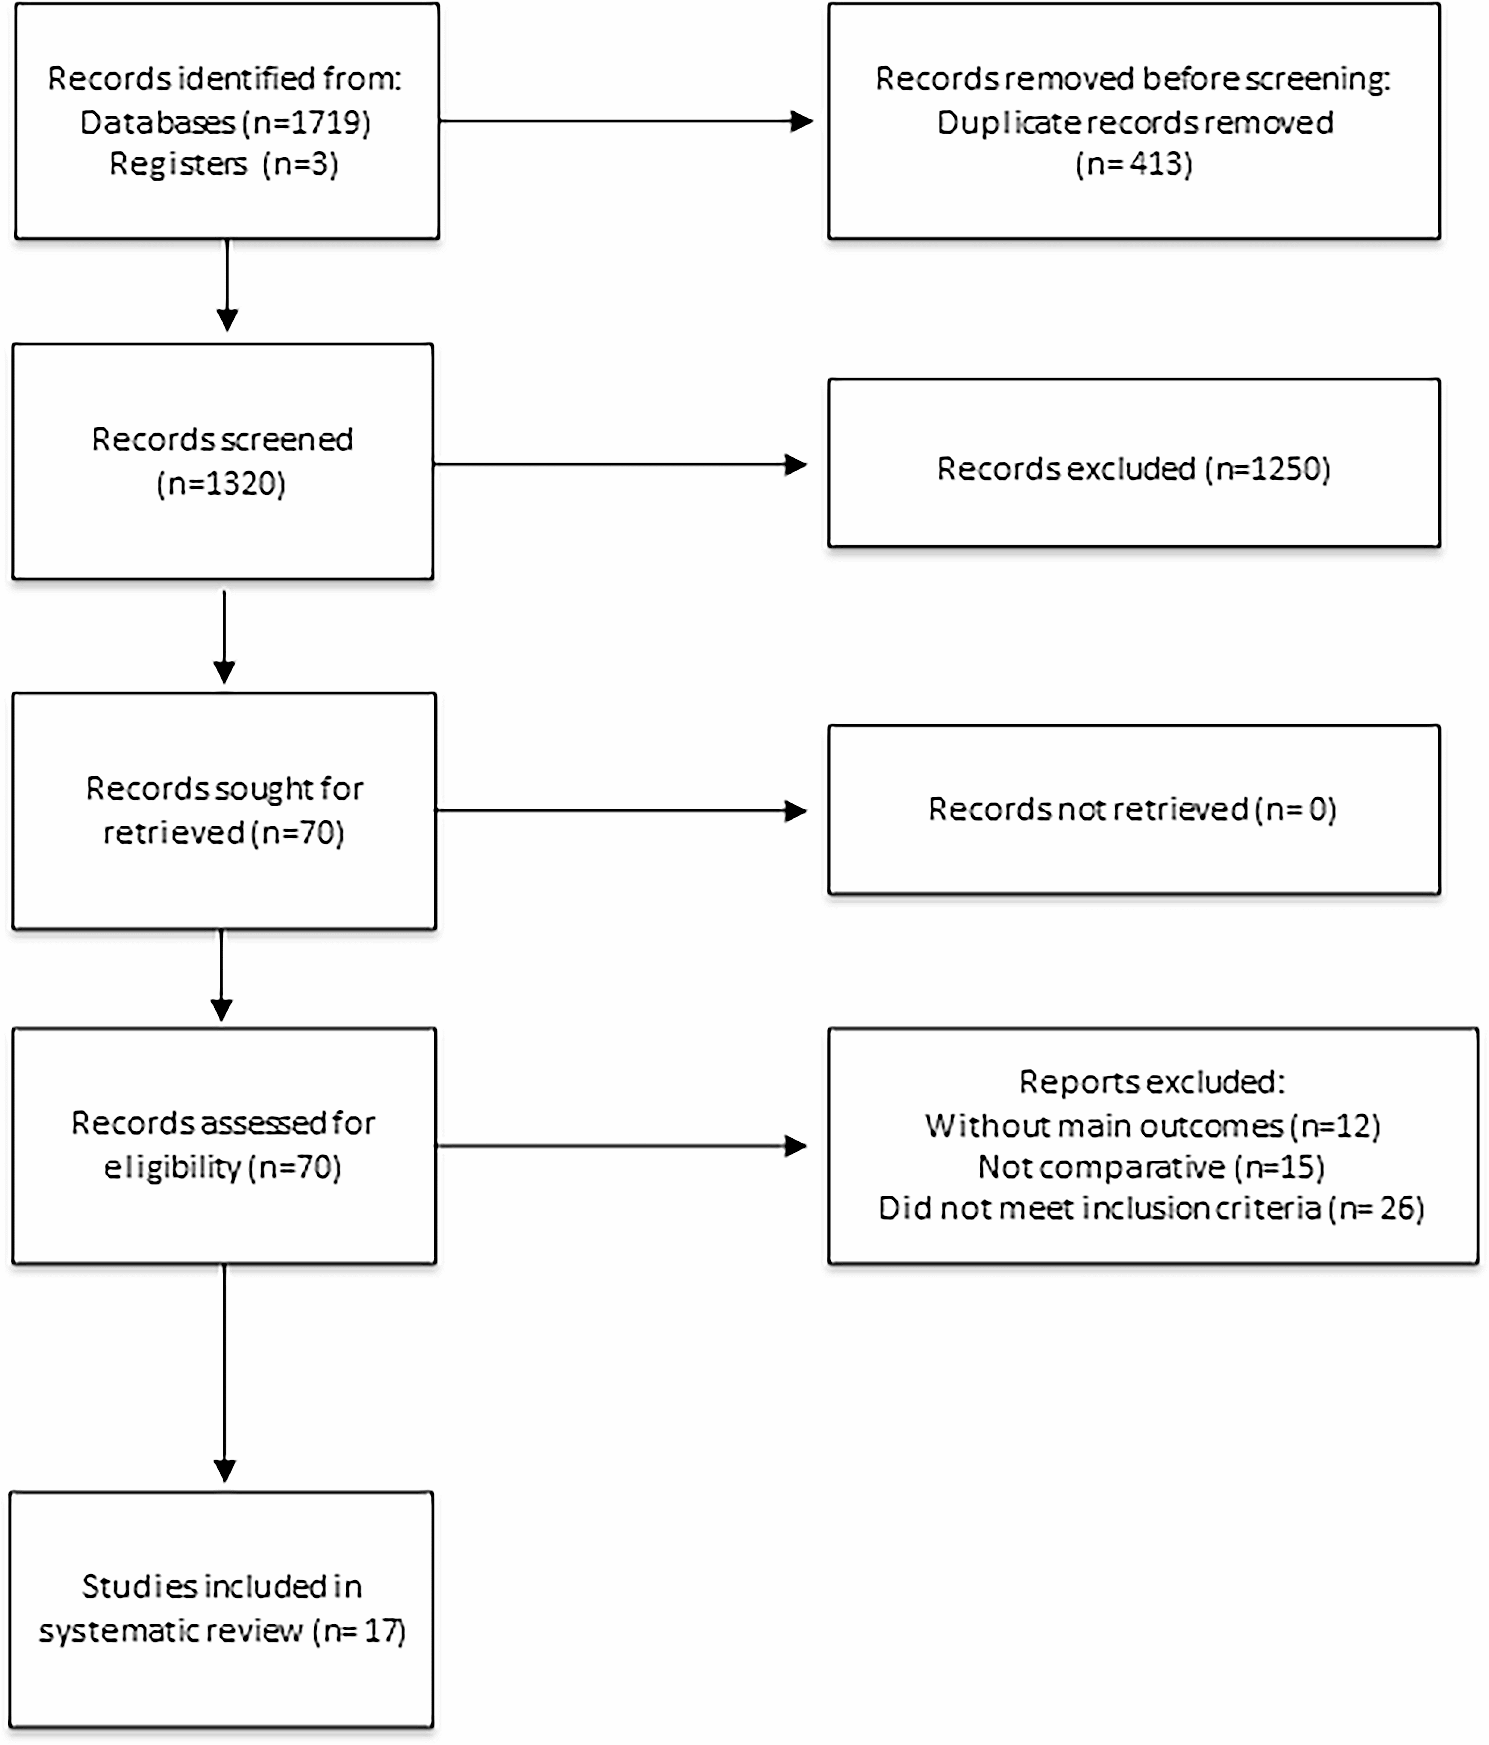 Survival outcomes of segmentectomy and lobectomy for early stage non-small cell lung cancer: a systematic review and meta-analysis